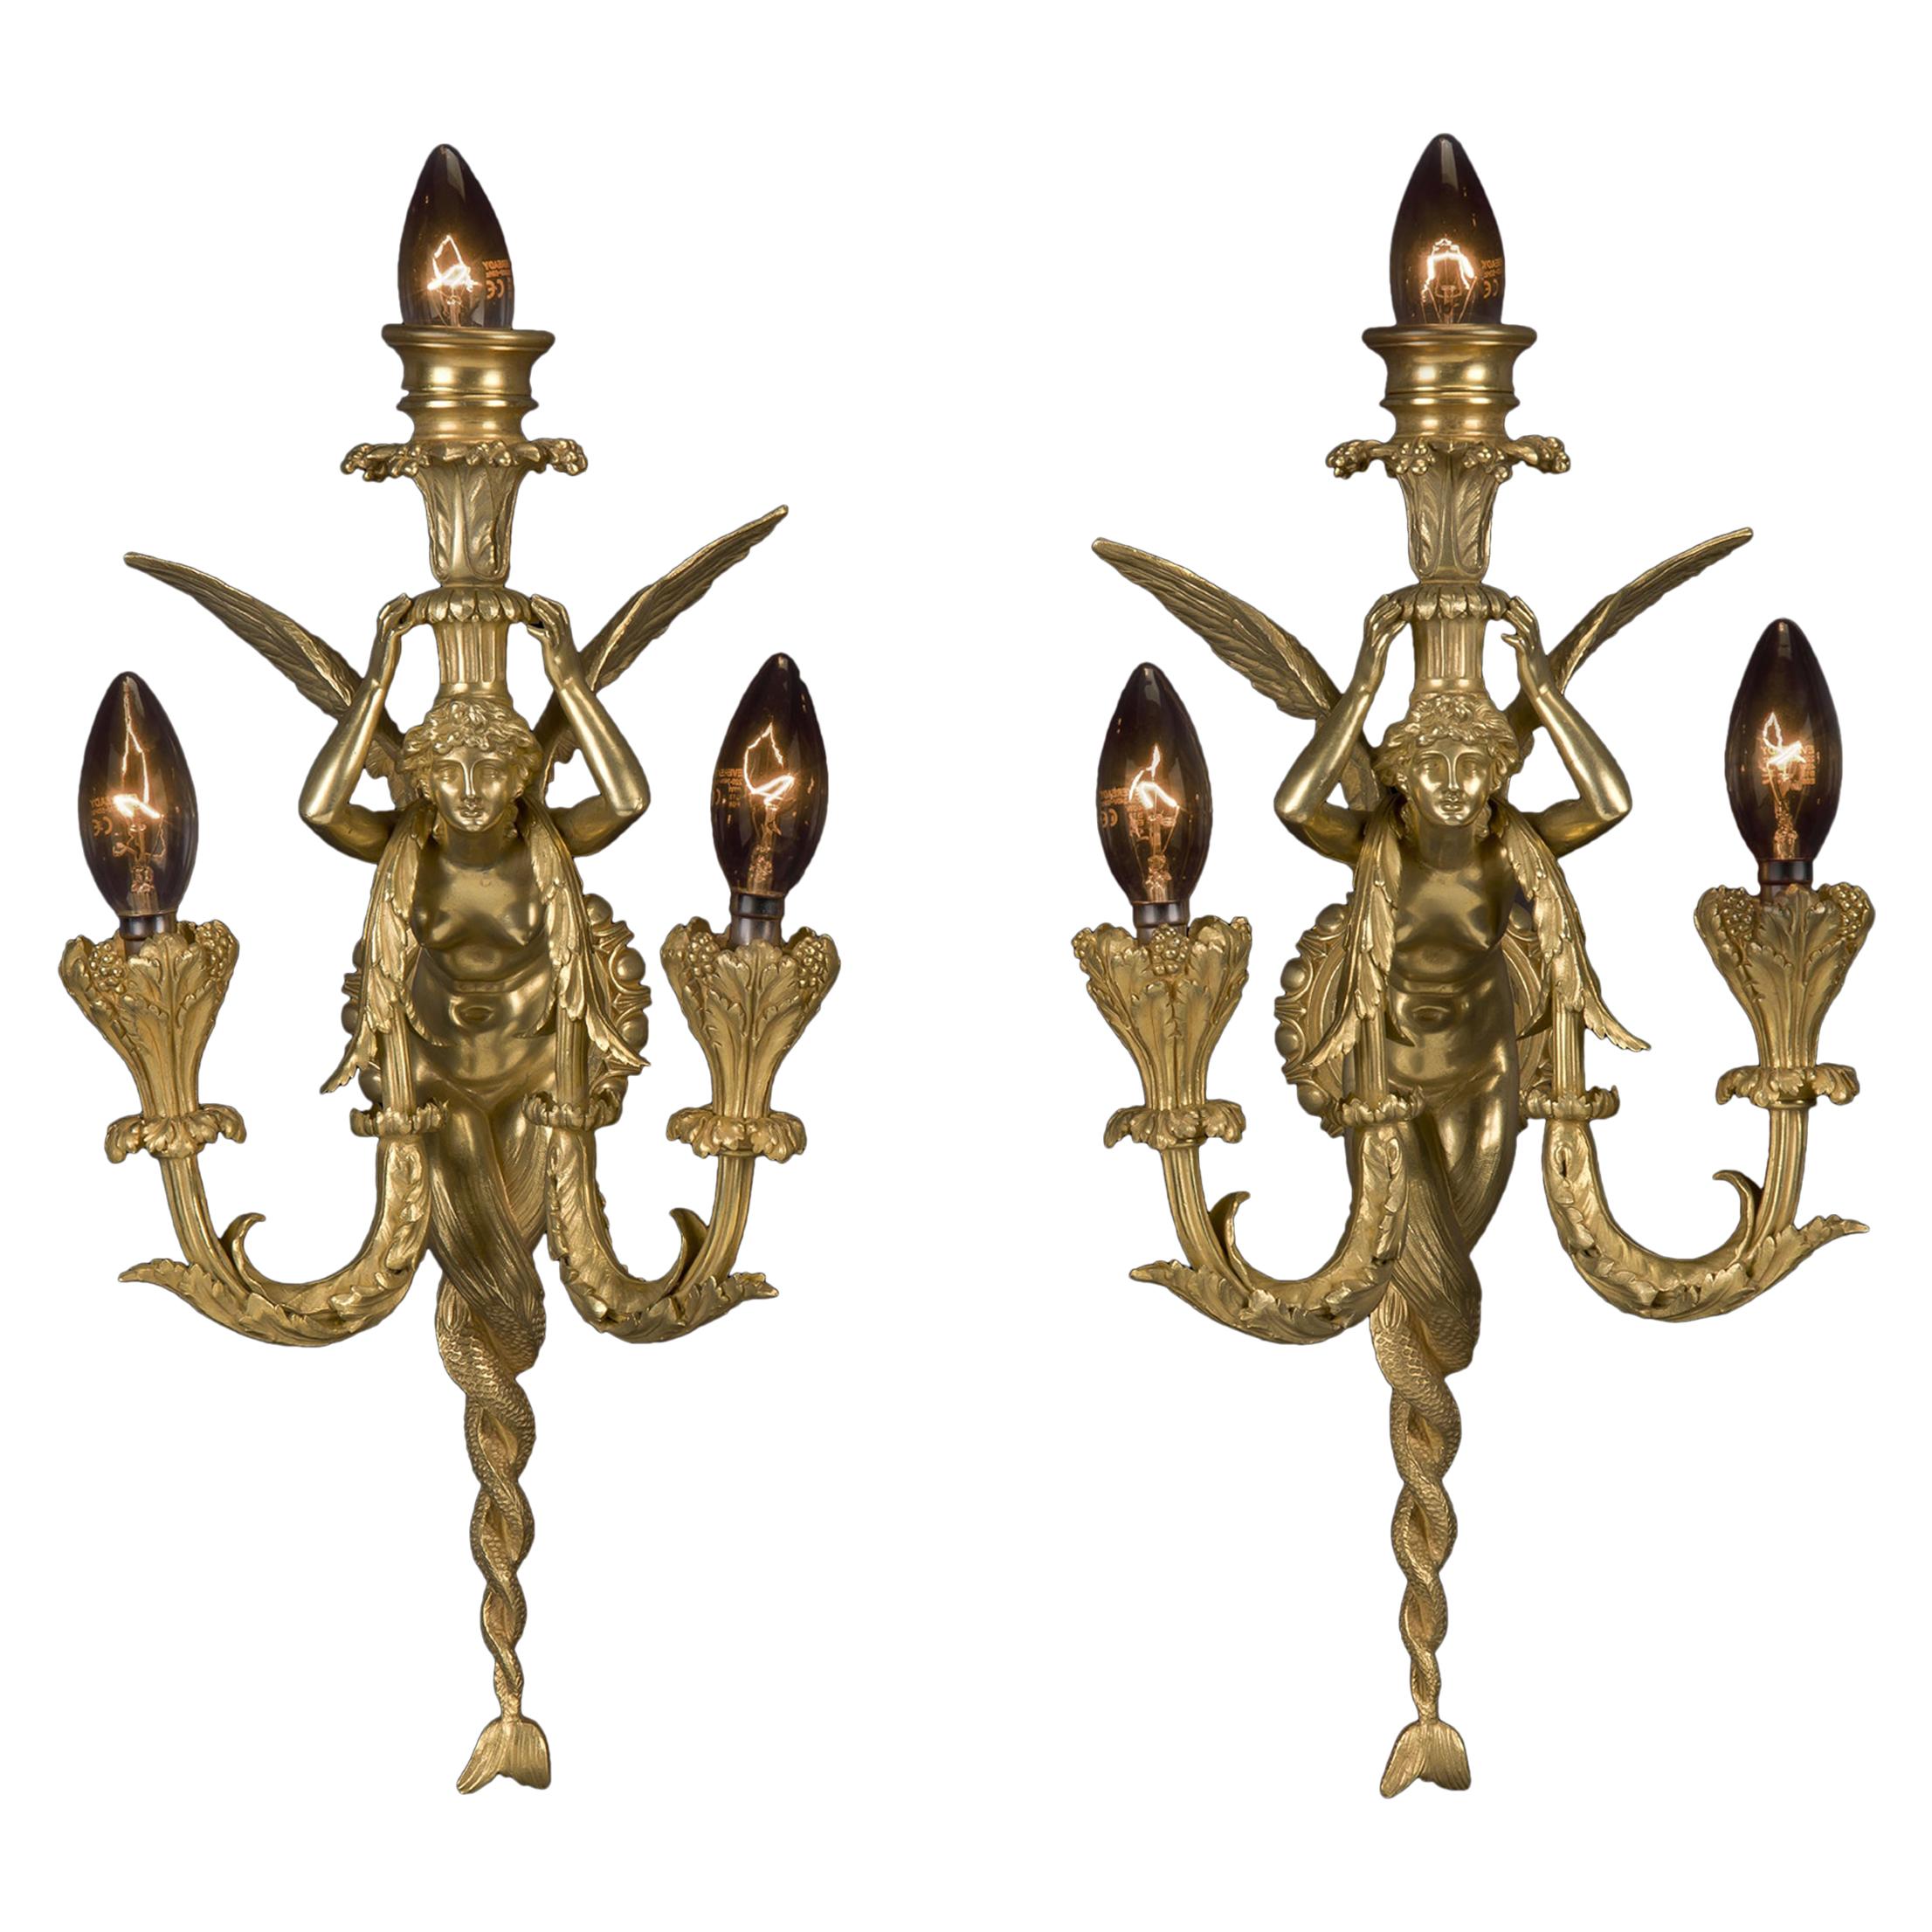 Pair of Napoléon III Gilt-Bronze Three-Light Wall Appliques, by Maison Millet